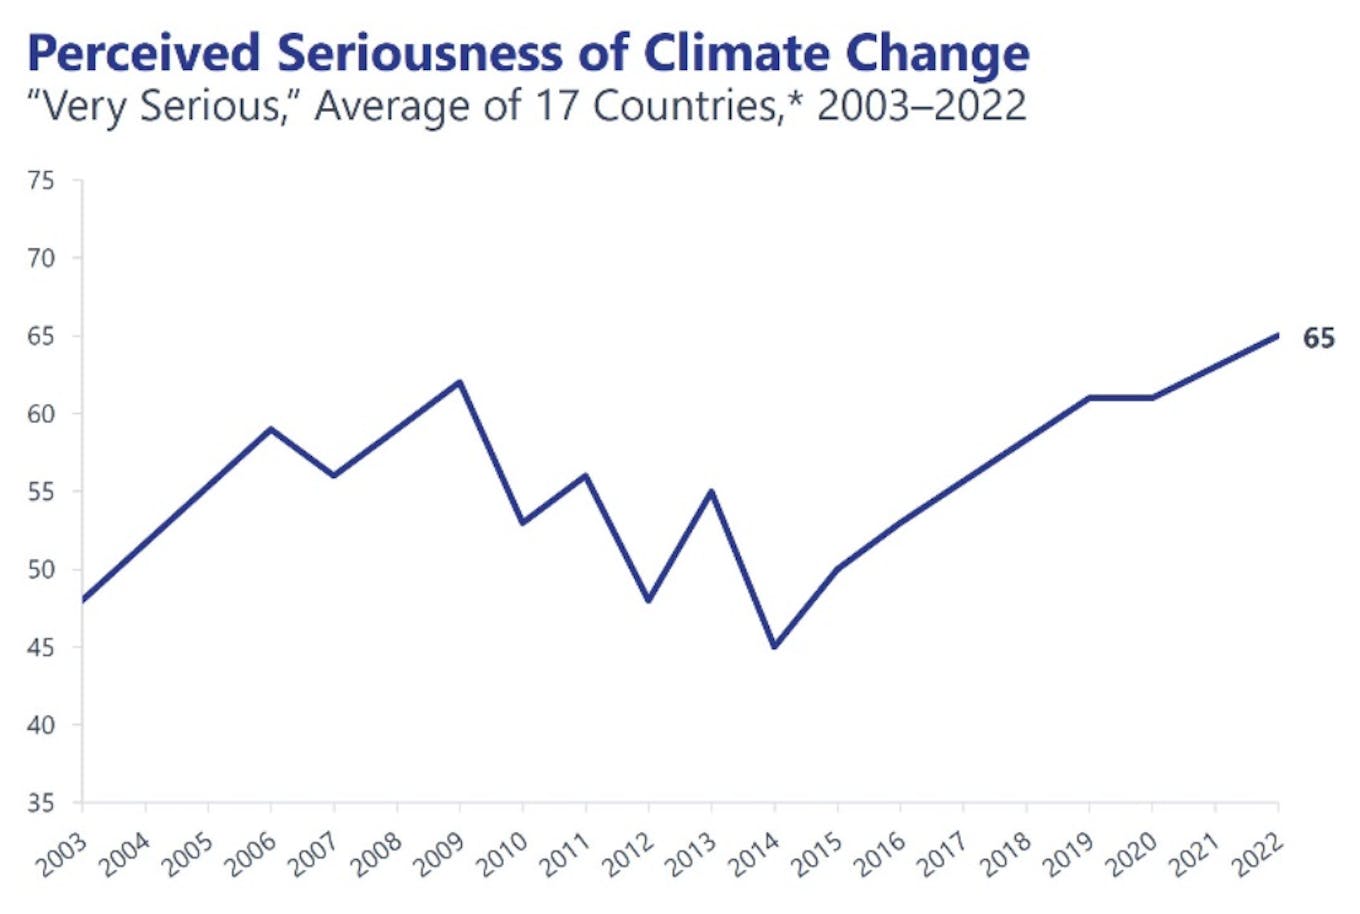 Perceived seriousness of climate change